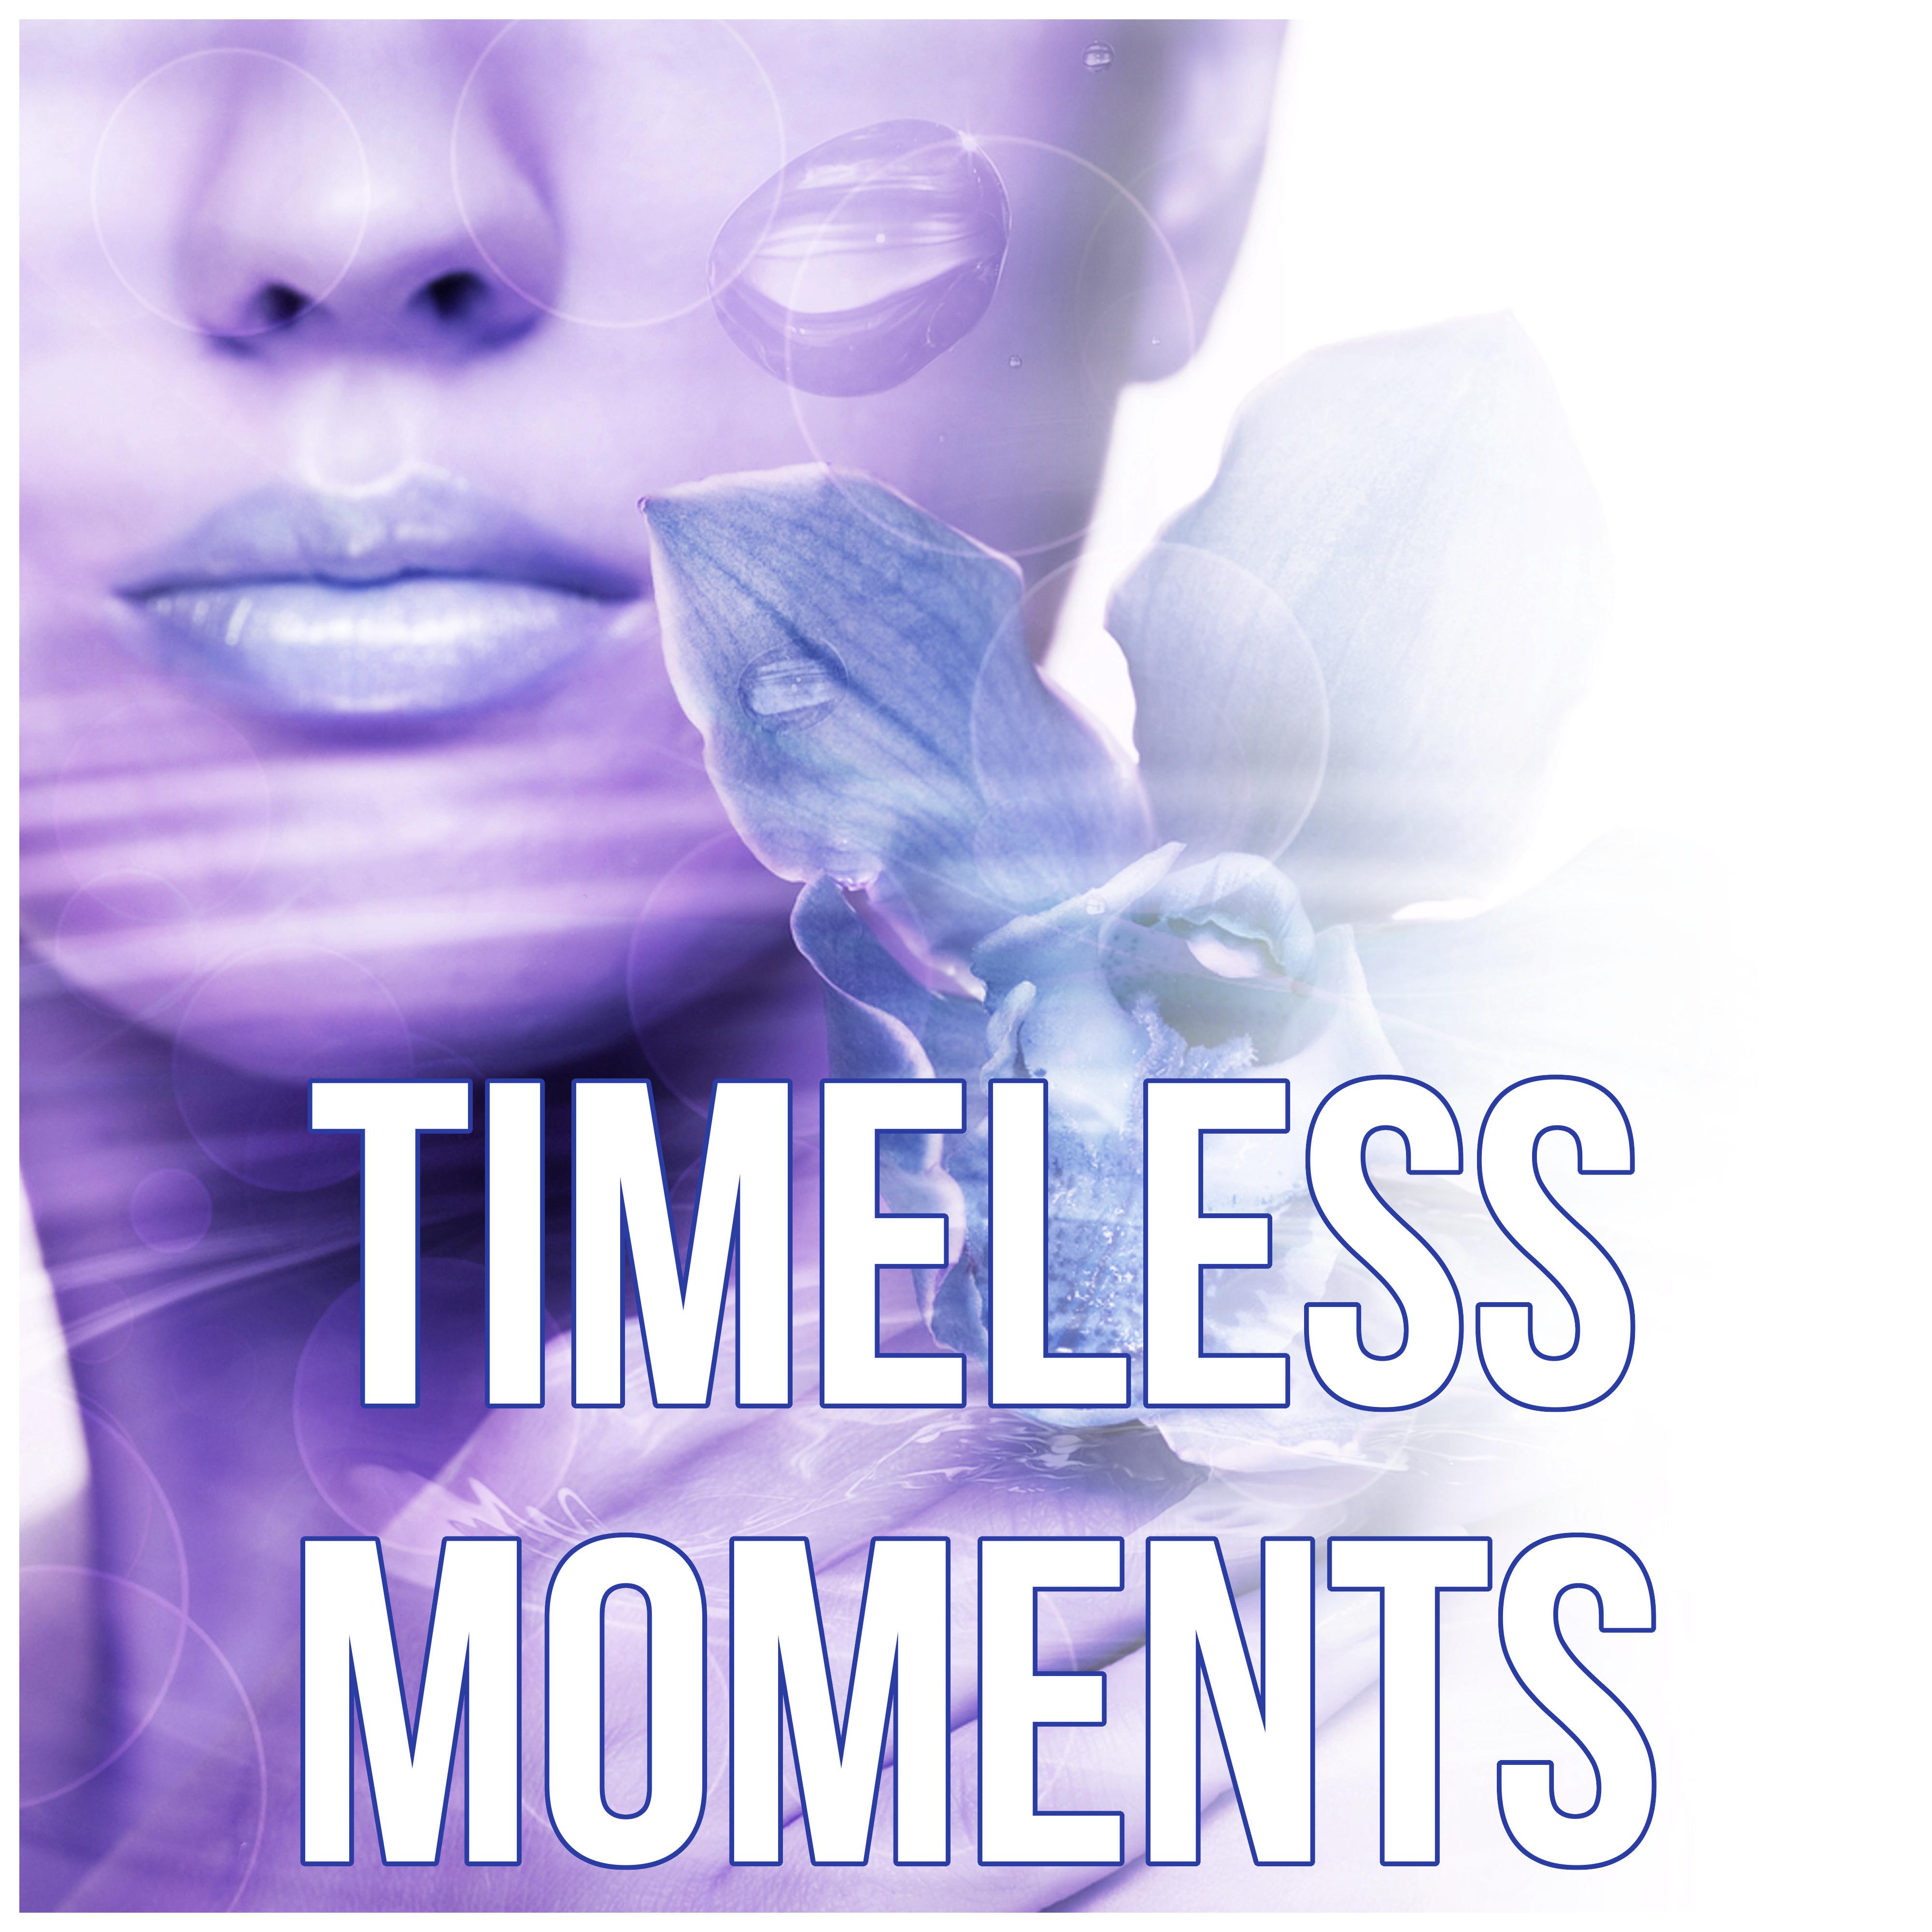 Timeless Moments - Home Spa, Massage Therapy, Ocean Waves for Well Being and Healthy Lifestyle, Yin Yoga